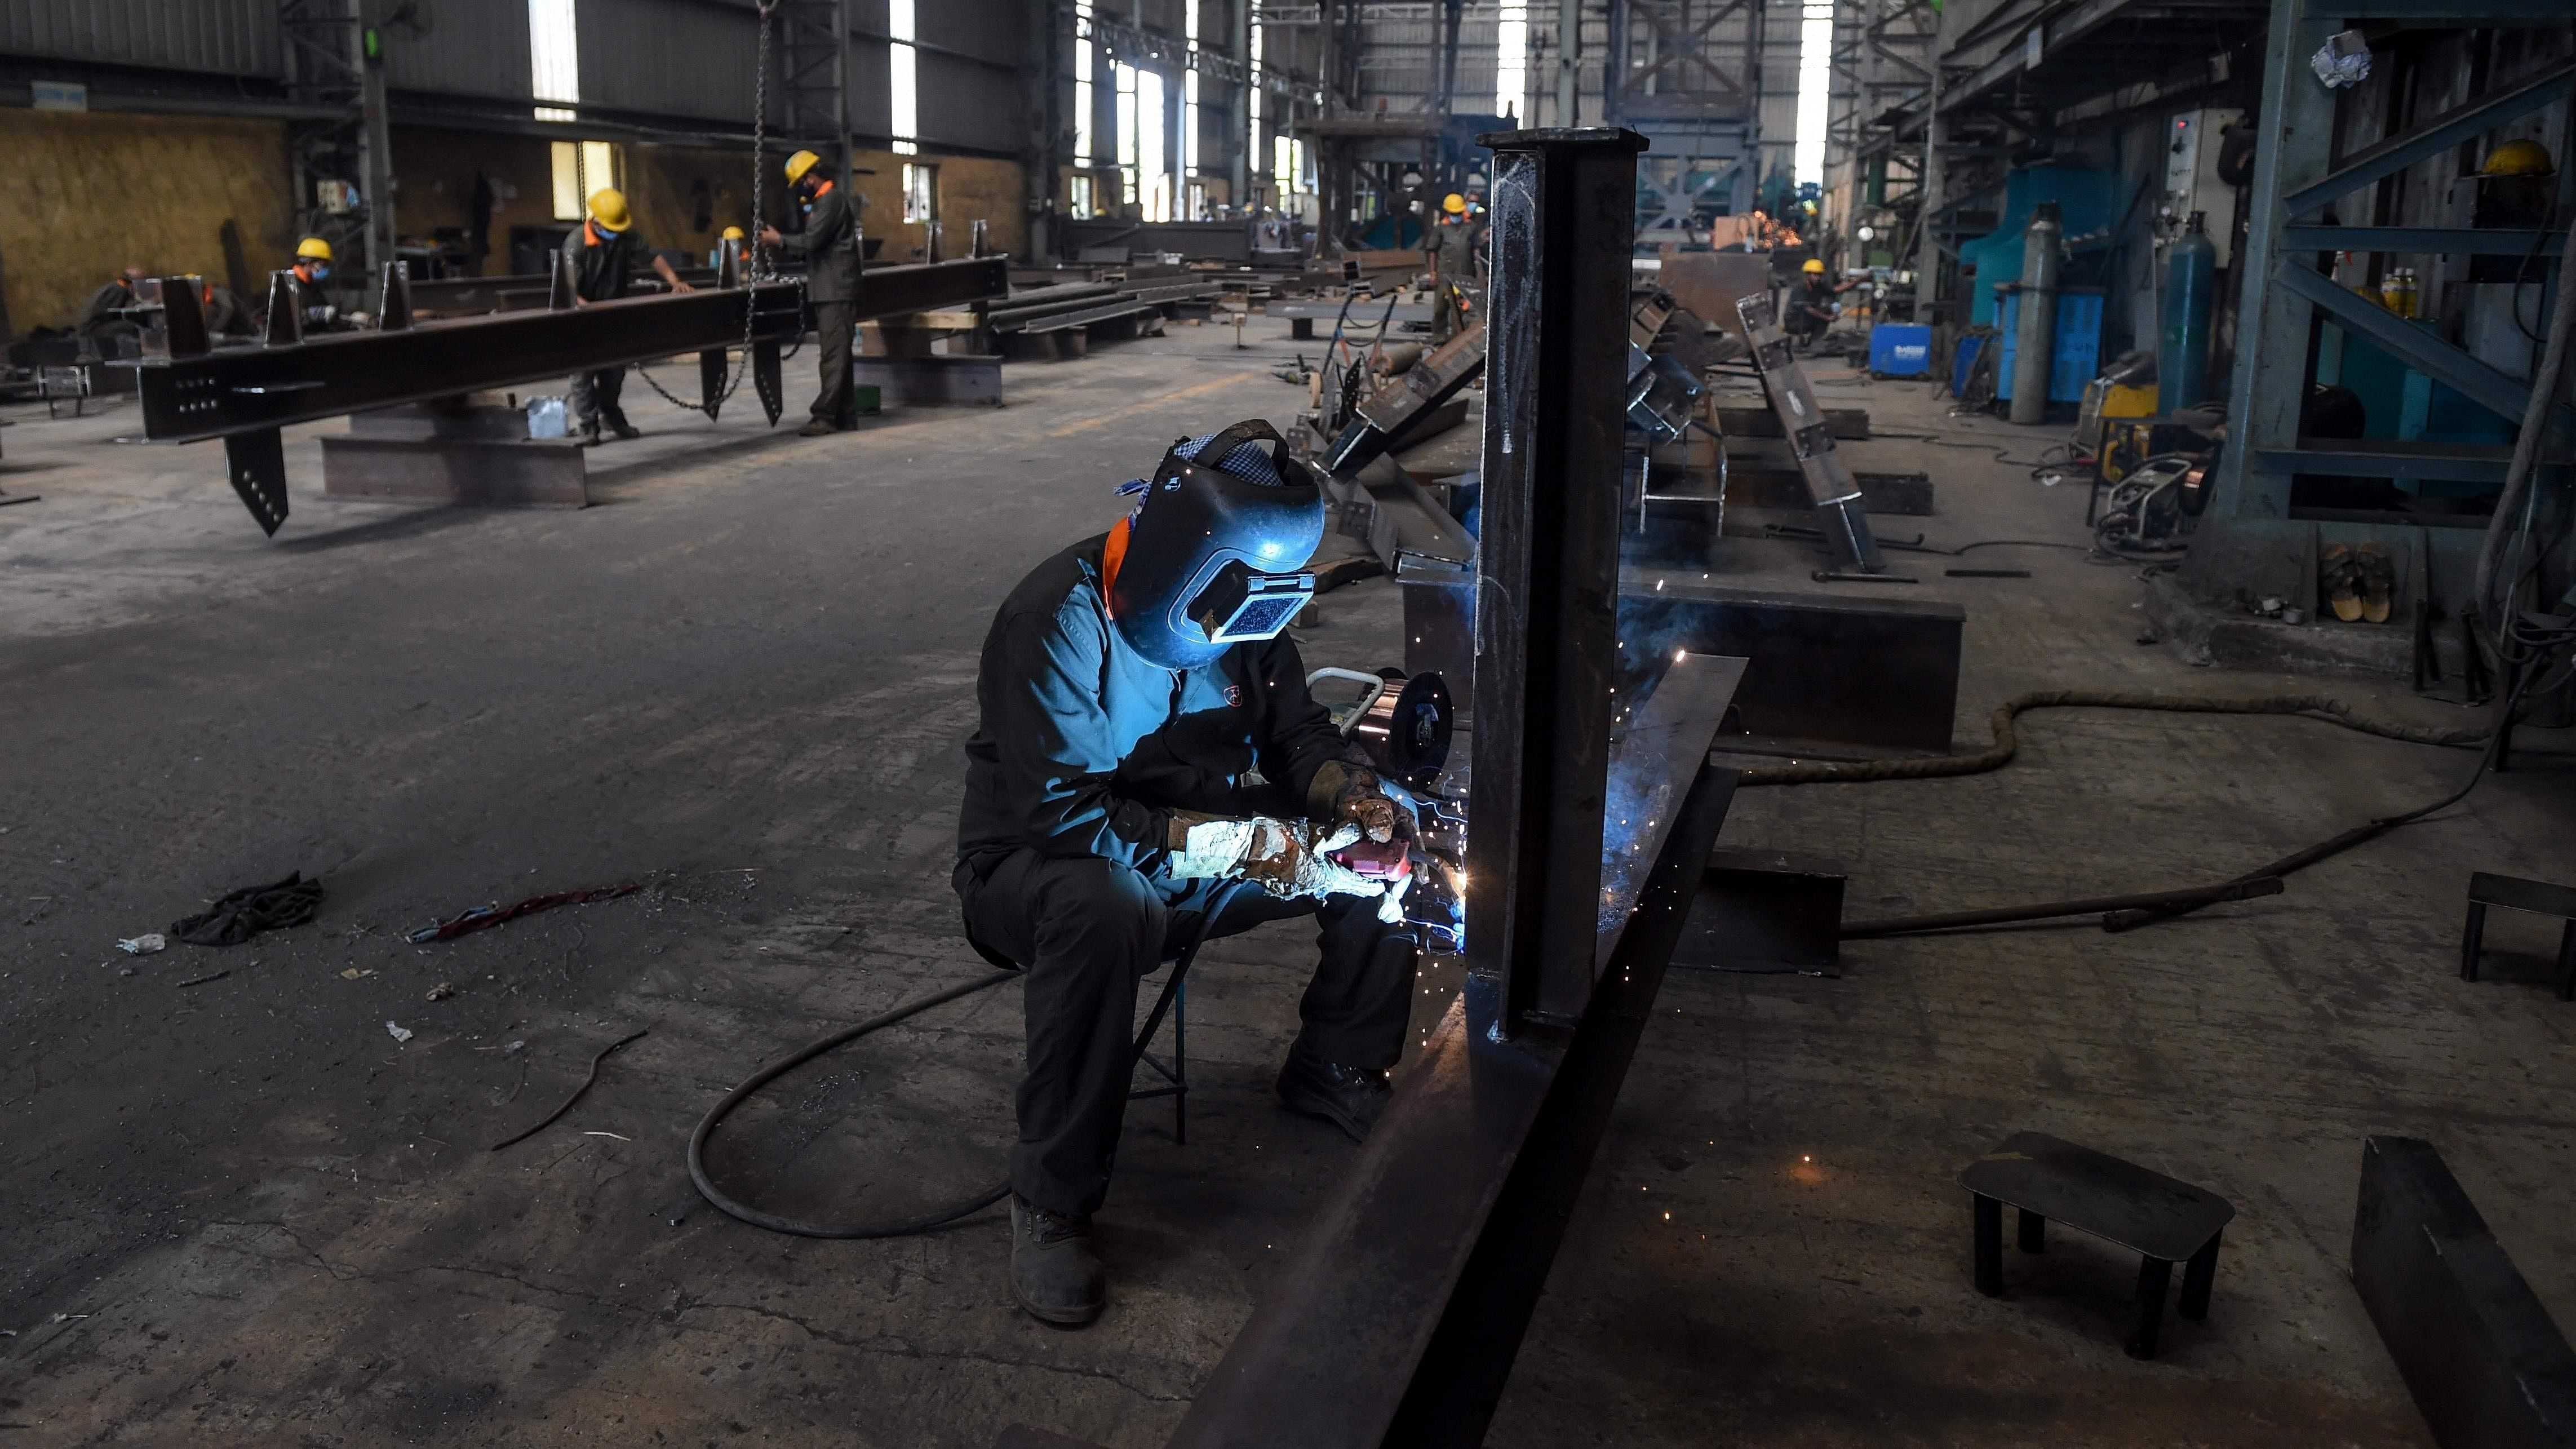  The manufacturing sector saw the highest decrease of 14.2 lakh in employees. Credit: AFP File Photo